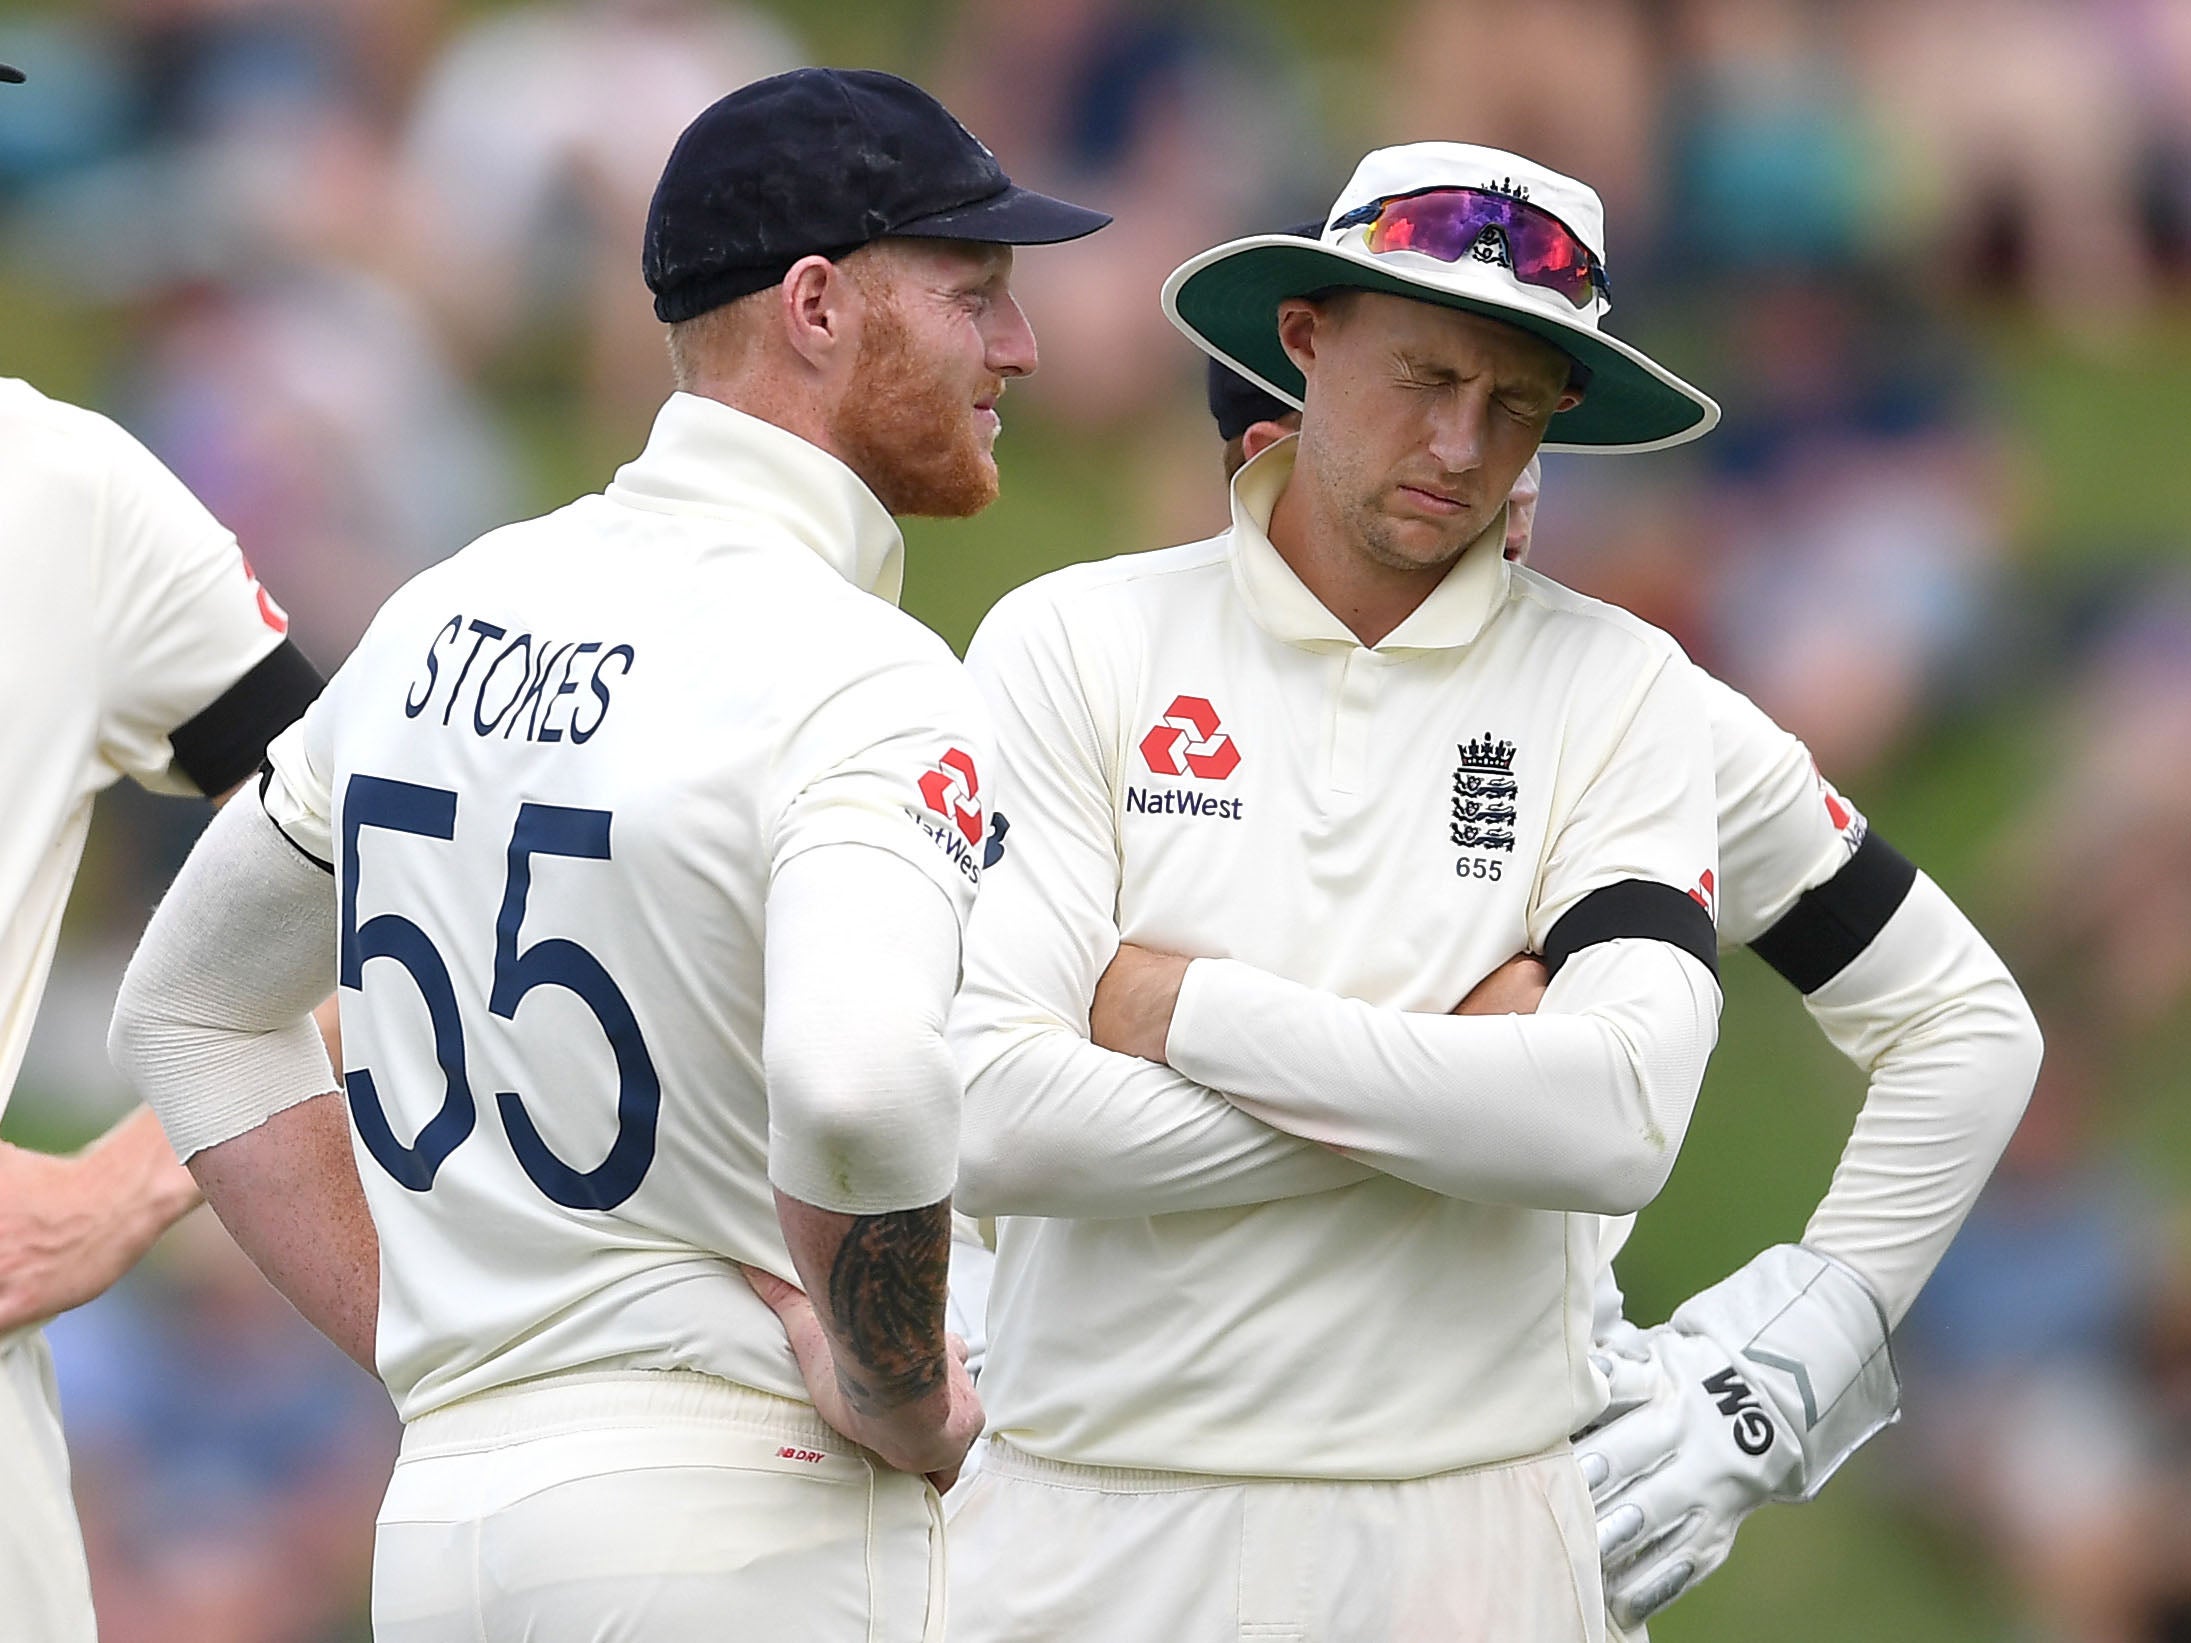 It was another frustrating day for England captain Joe Root after winning the toss and electing to bowl